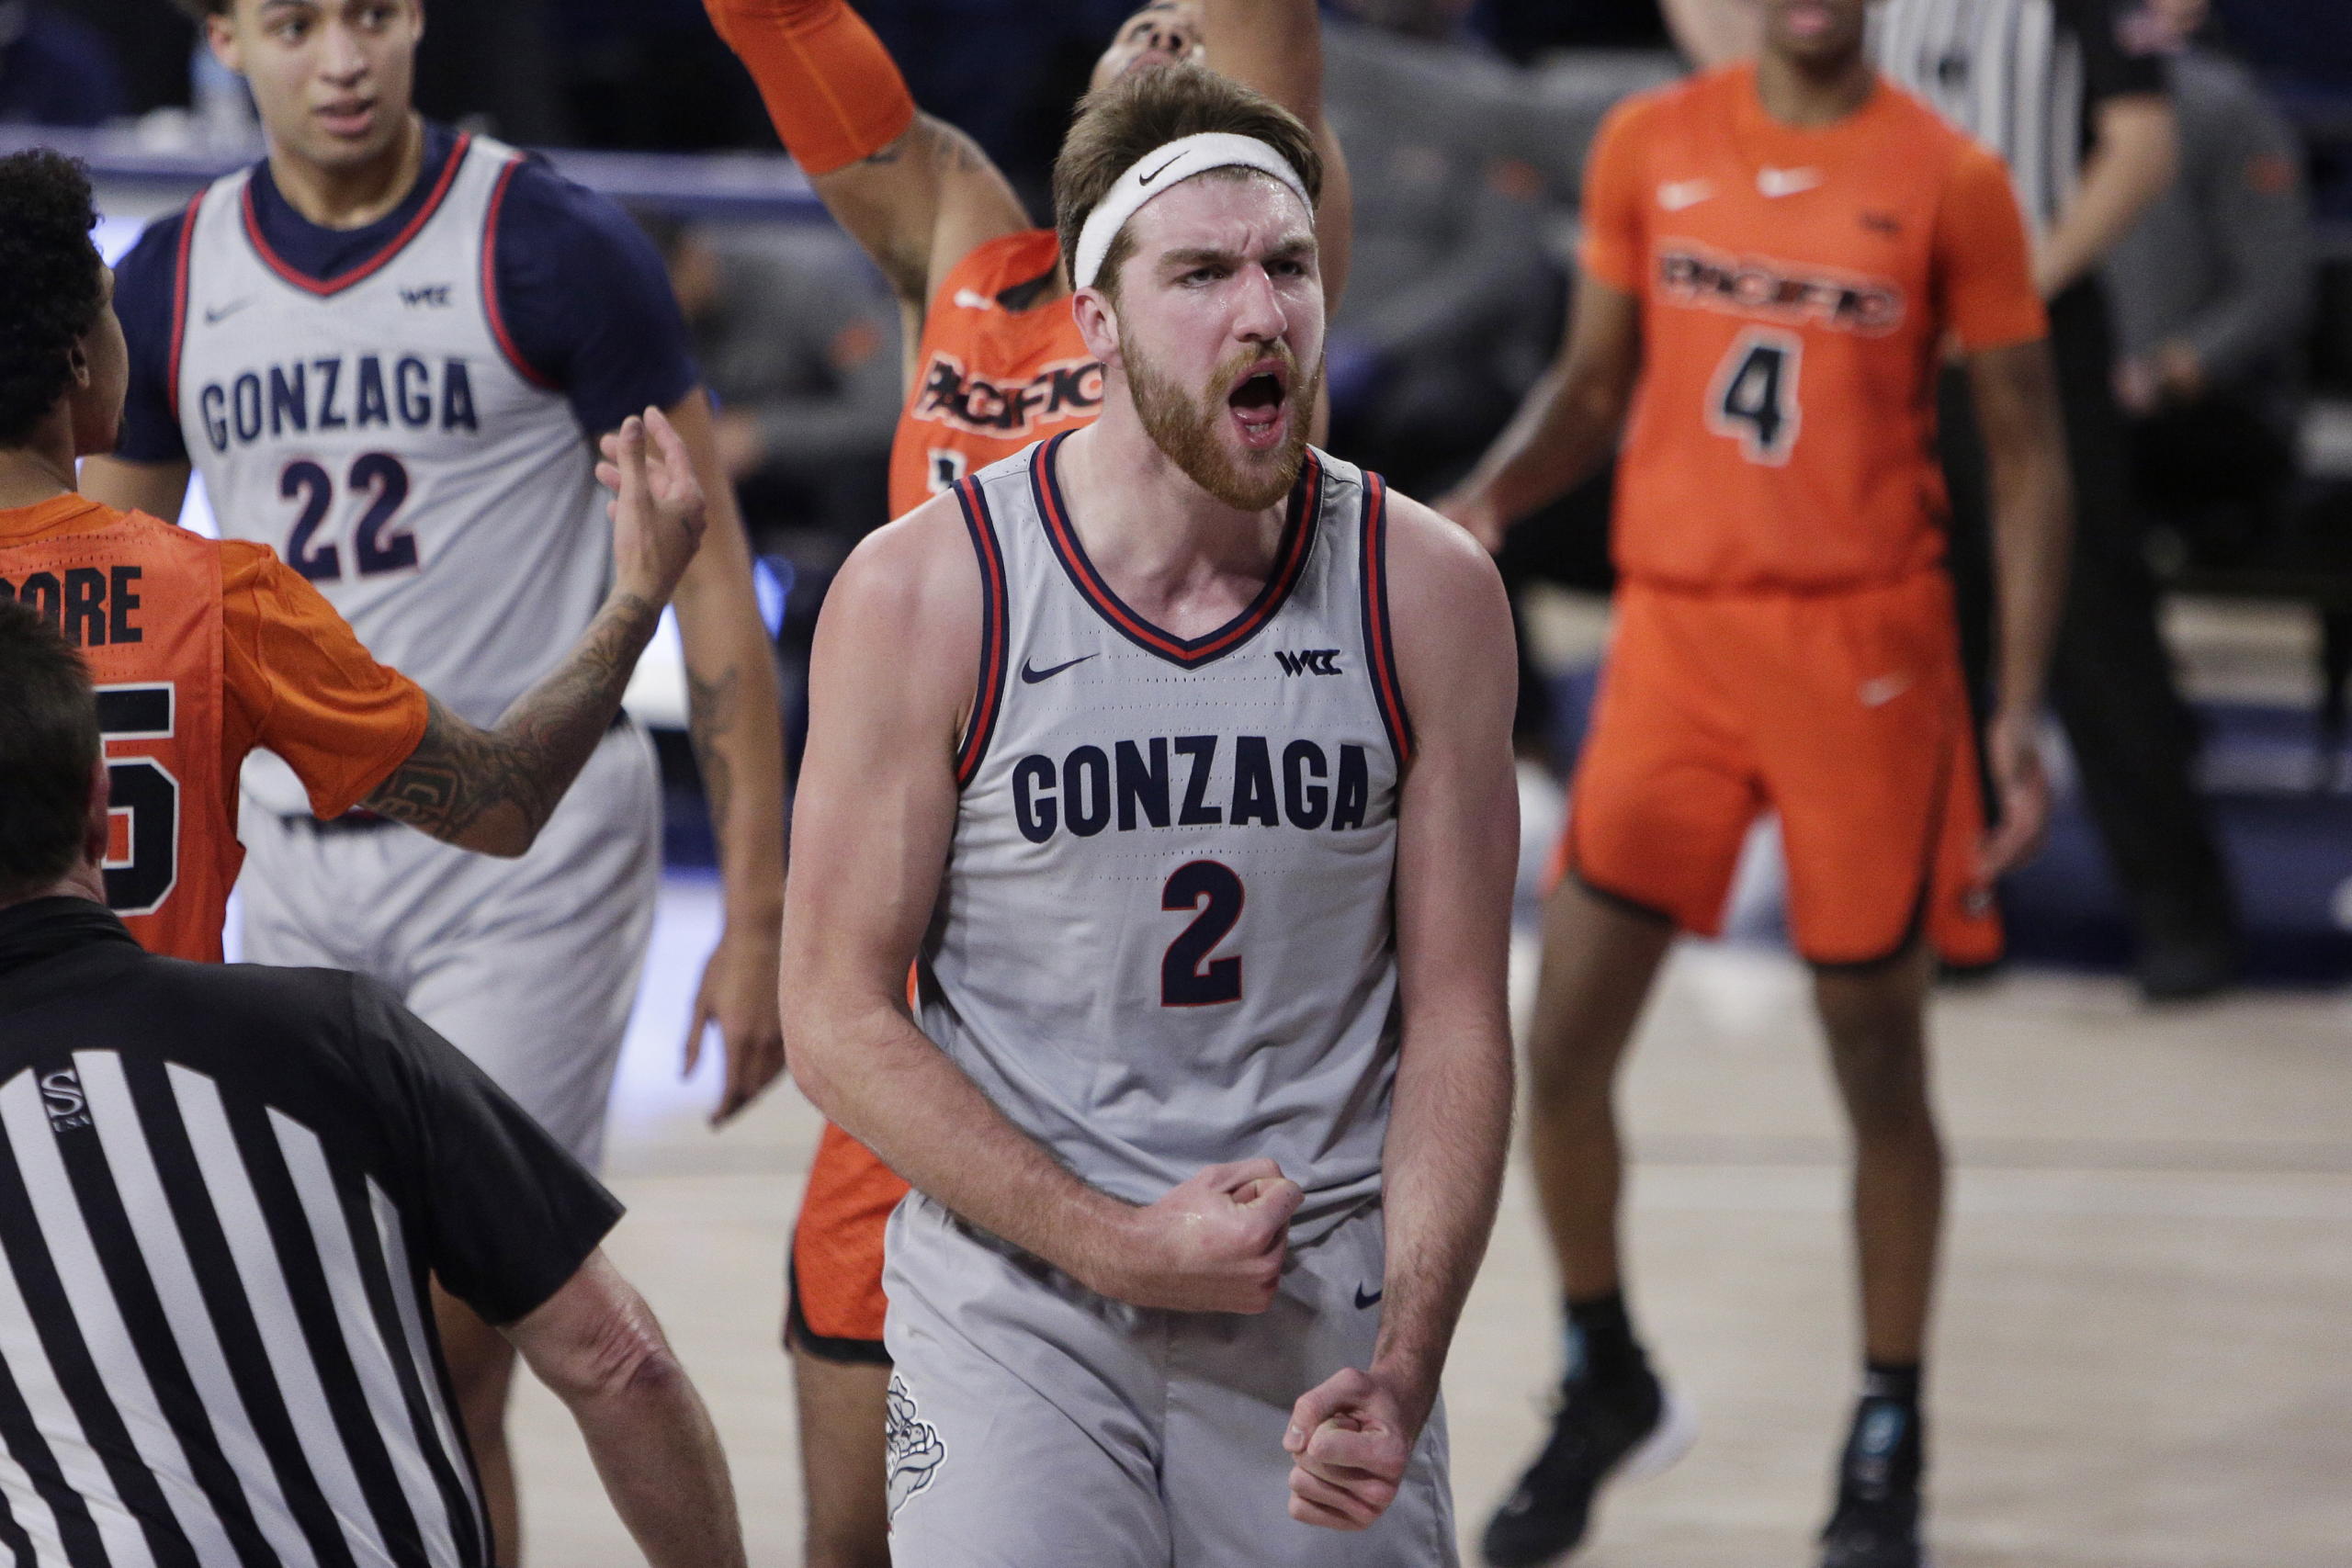 Gonzaga forward Drew Timme celebrates after scoring a basket during the first half of the team's NCAA college basketball game against Pacific in Spokane, Wash., Saturday, Jan. 23, 2021.